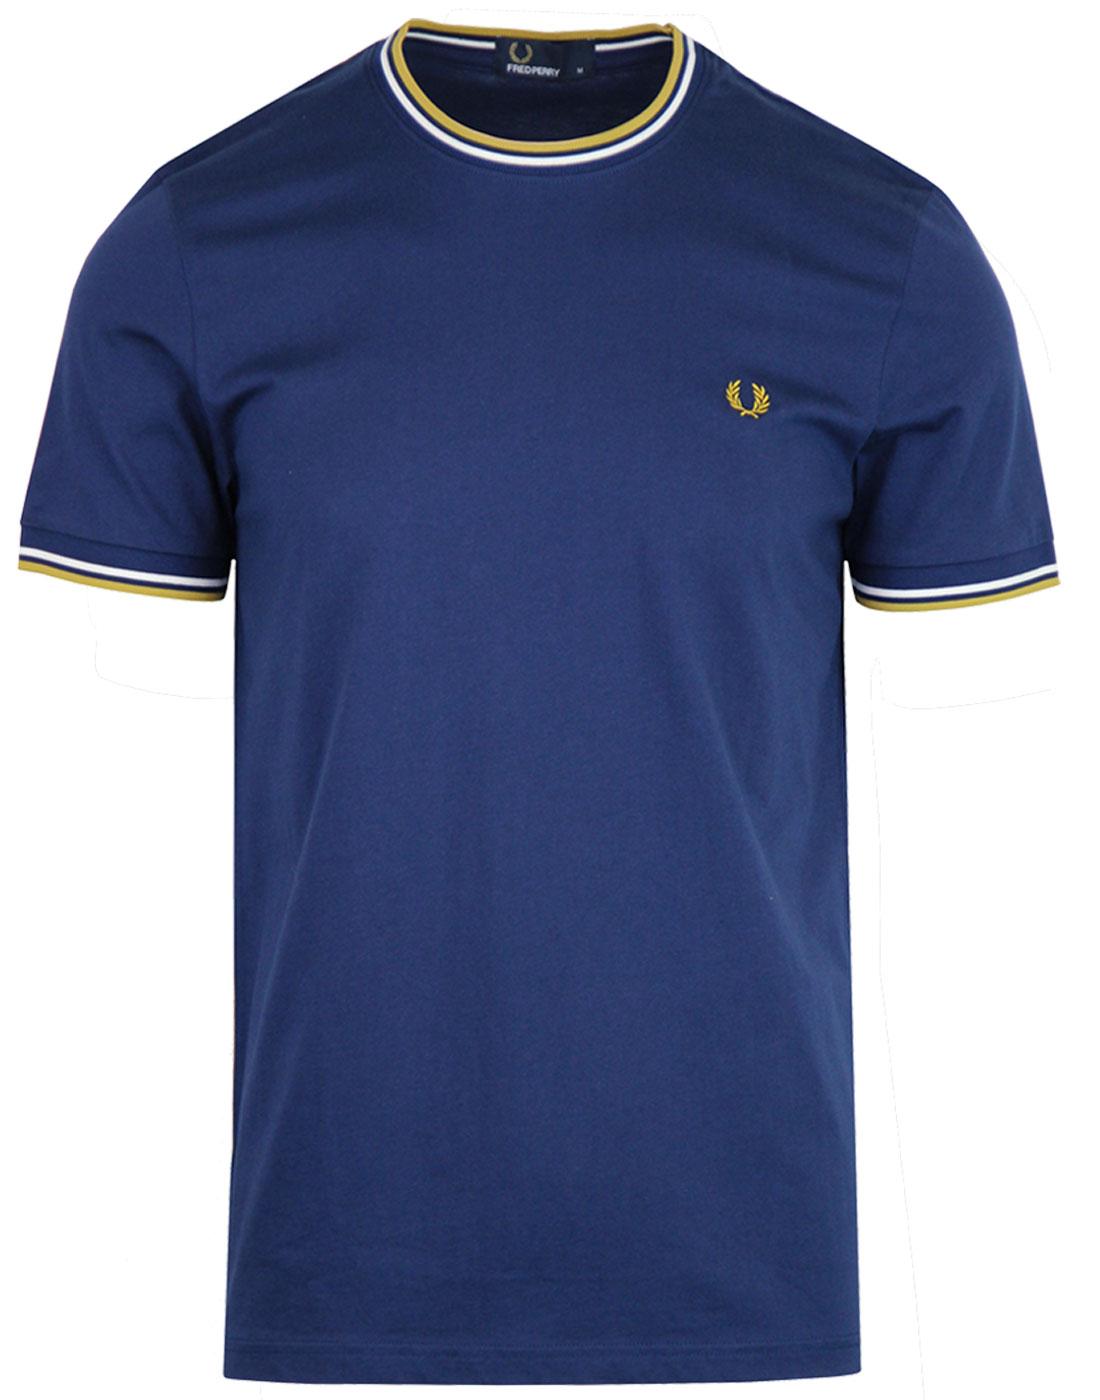 FRED PERRY Men's Retro Mod Twin Tipped Crew Tee FN